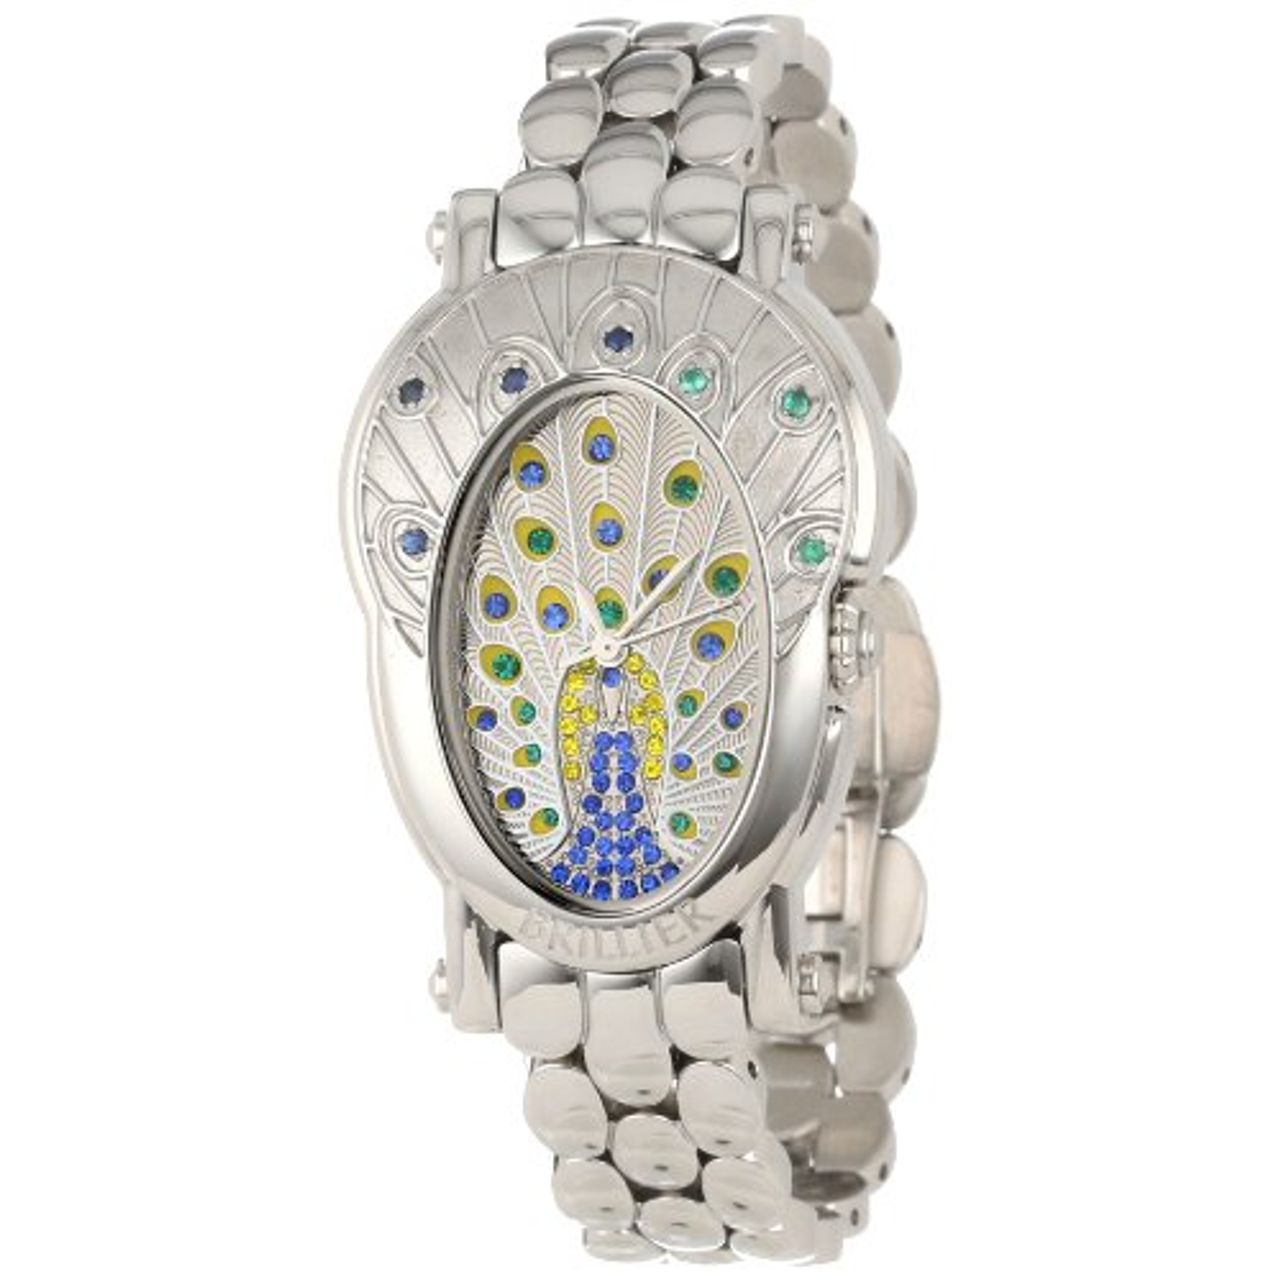 Brillier Women's 18-18 Royal Plume Peacock Inspired Swiss Watch